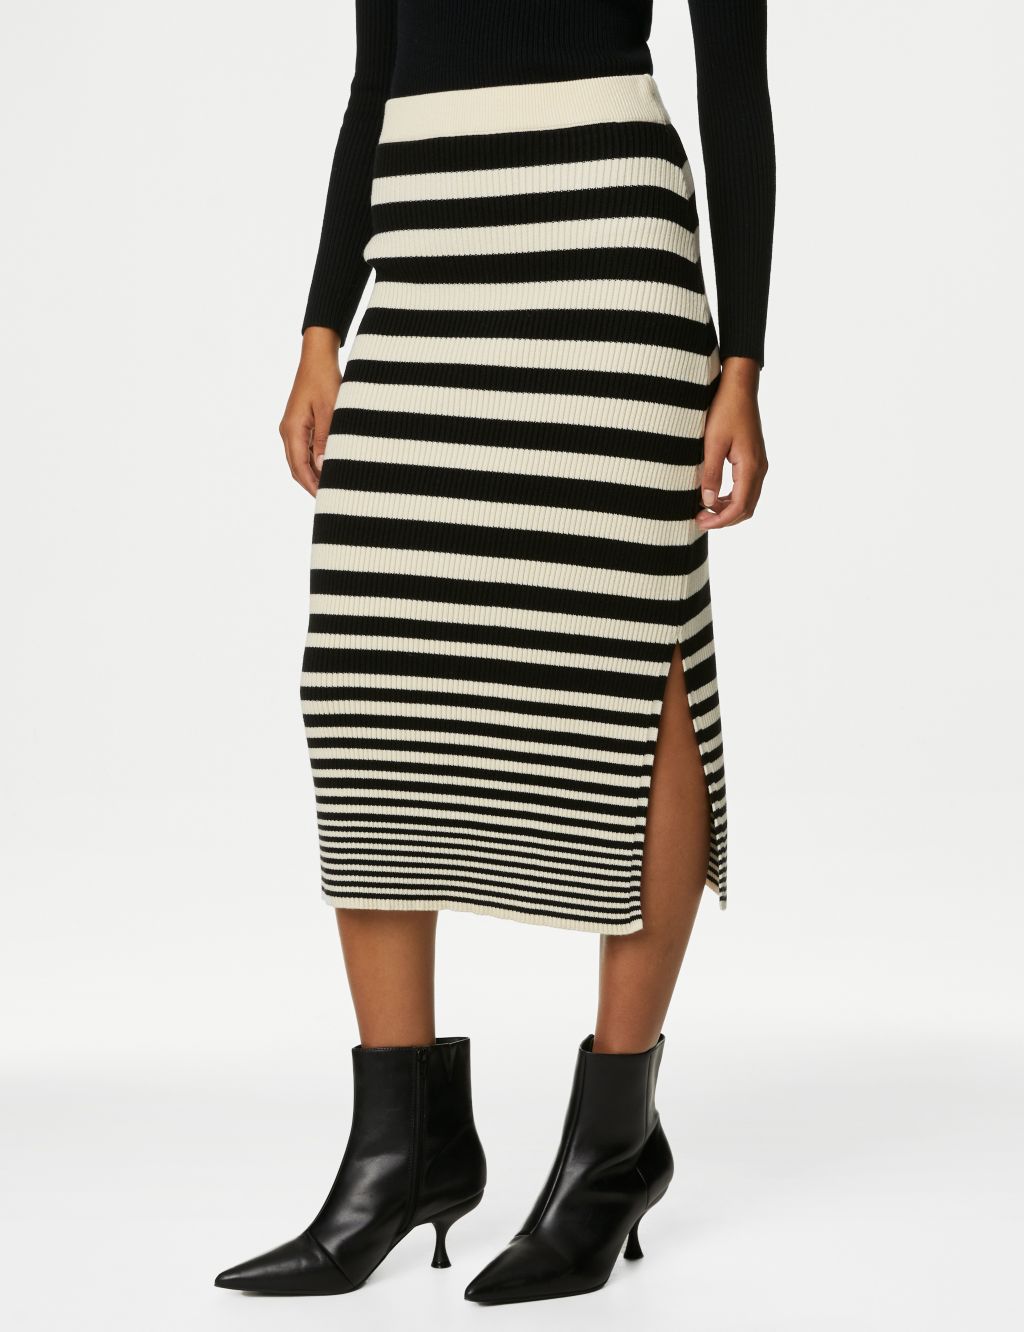 Soft Touch Striped Knitted Midi Skirt image 4